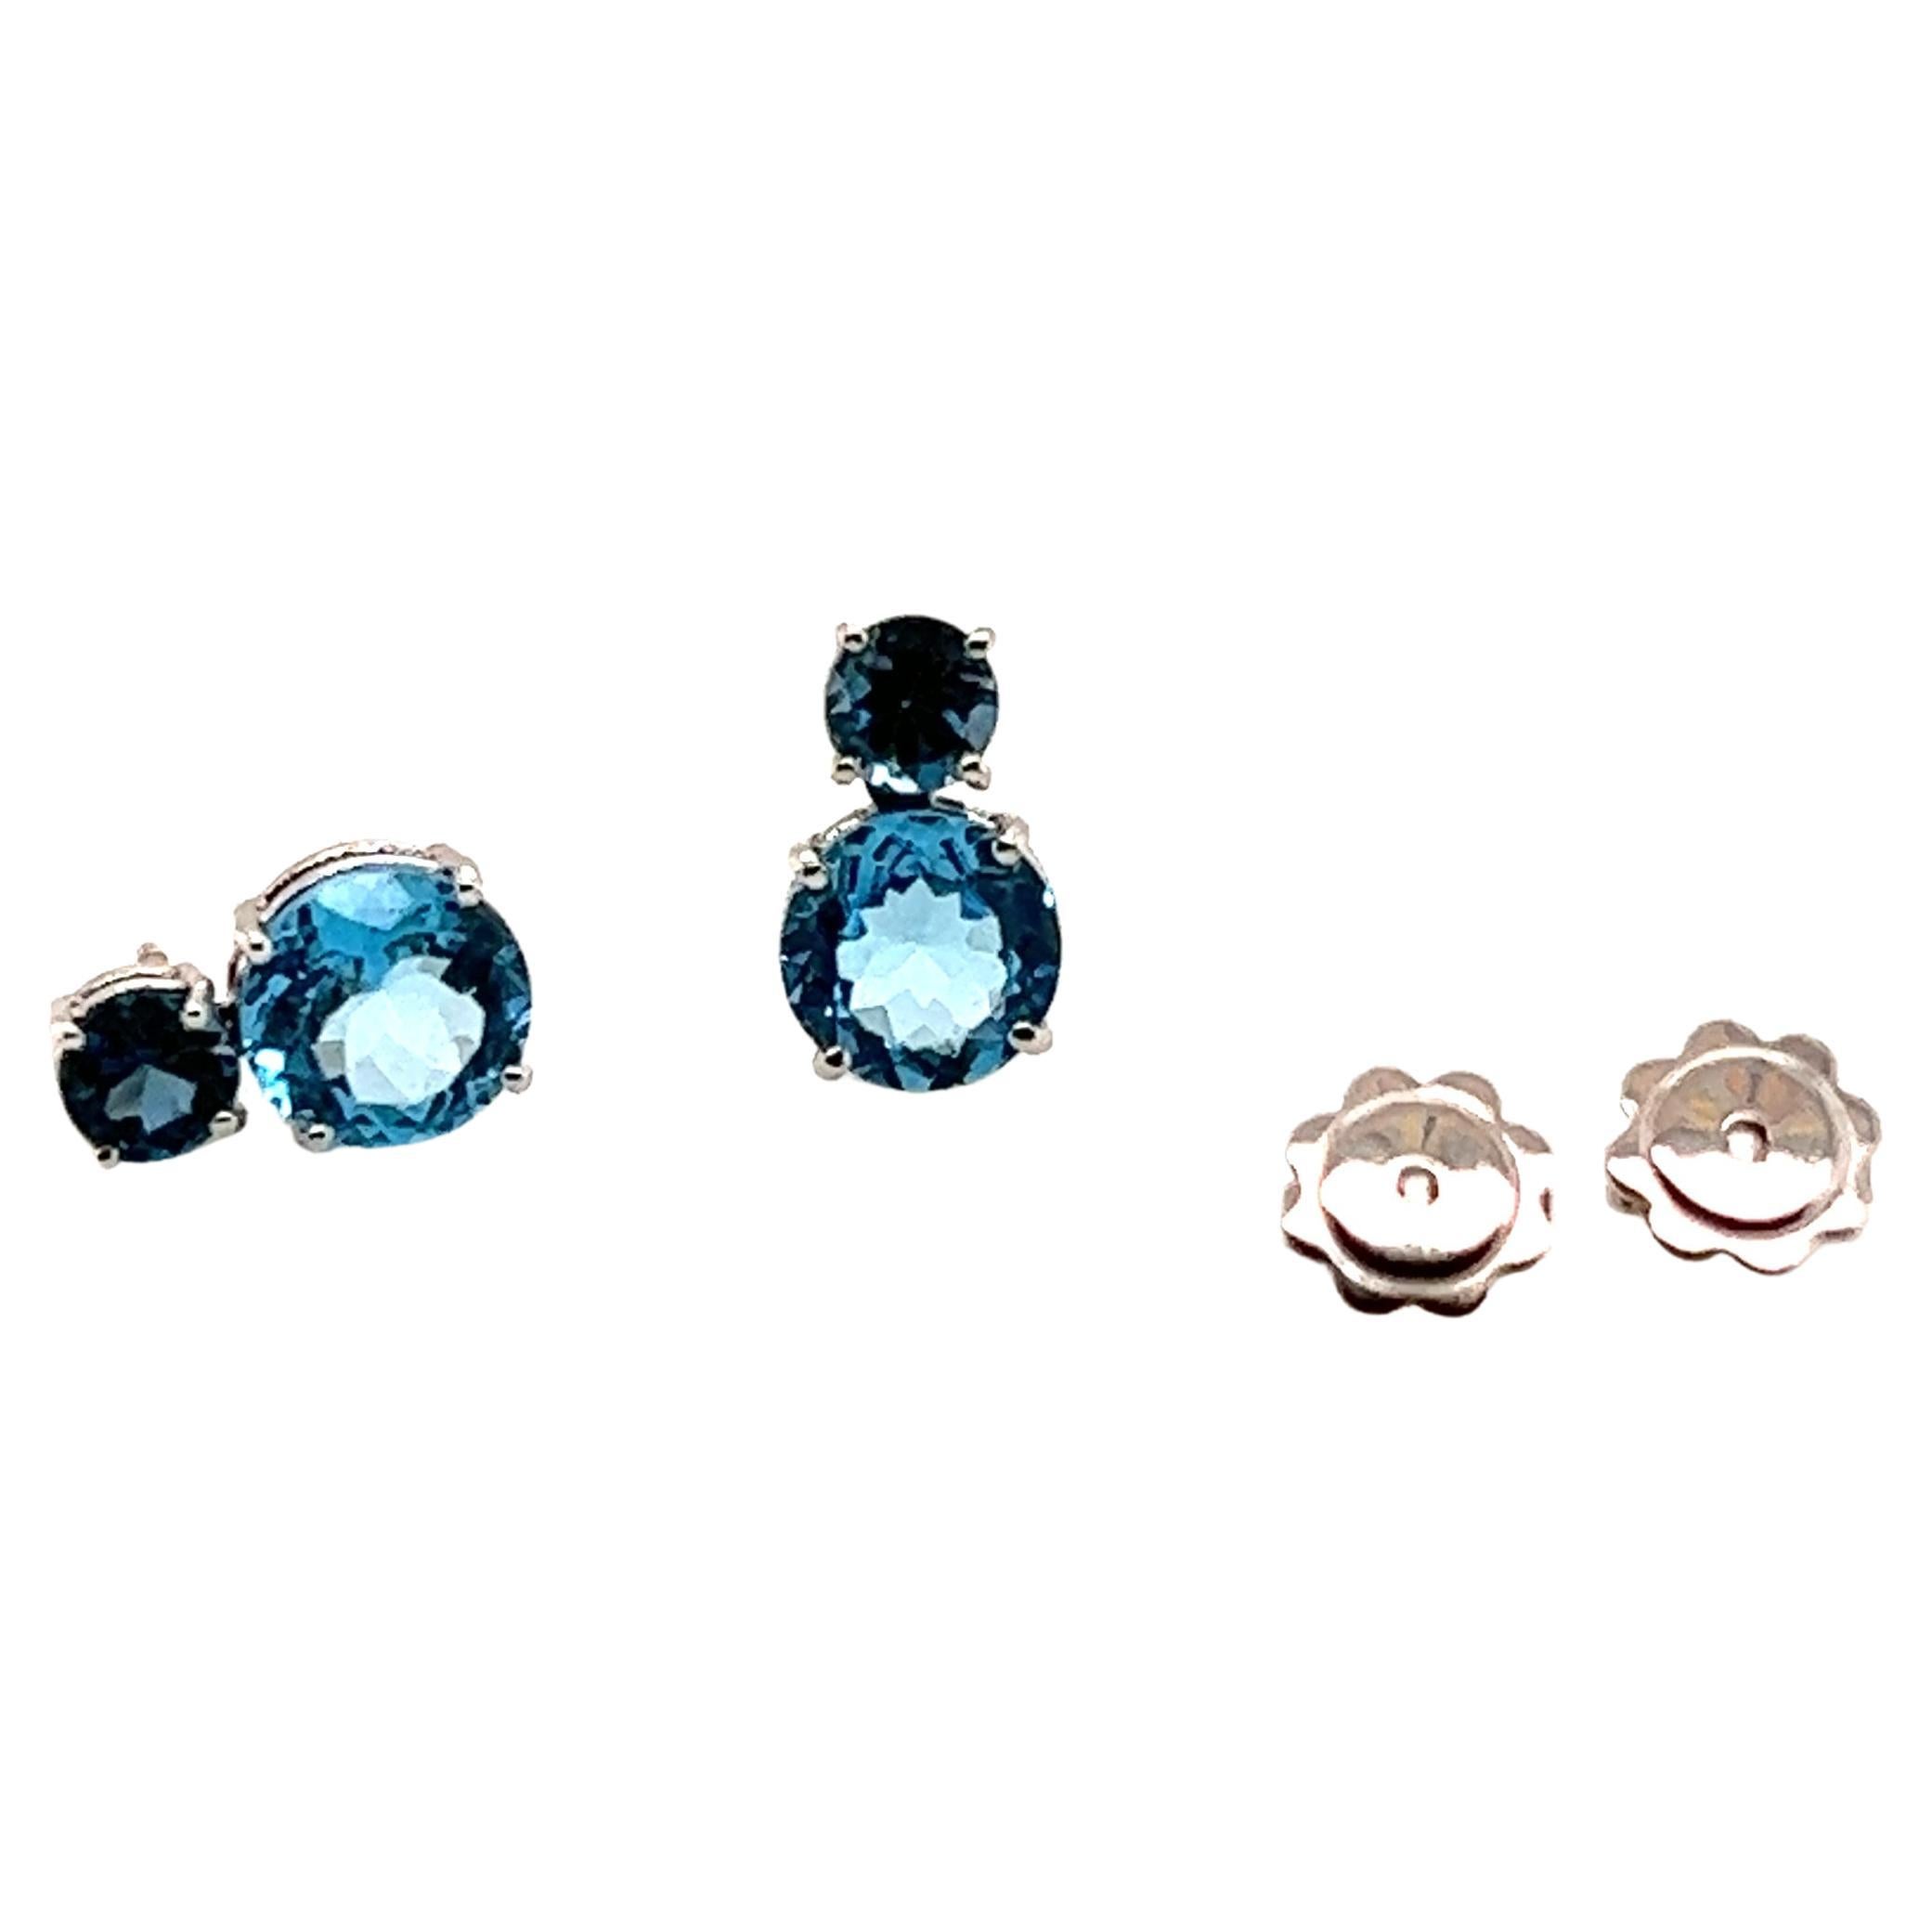 White Gold Earrings With Topaz and London Topaz
French Collection by Mesure et Art du Temps. 

18 Carat white gold earrings surmounted by a topaz and a London topaz. The earring measures 1.3 cm in length and 1.4 cm in width. The weight of the gold